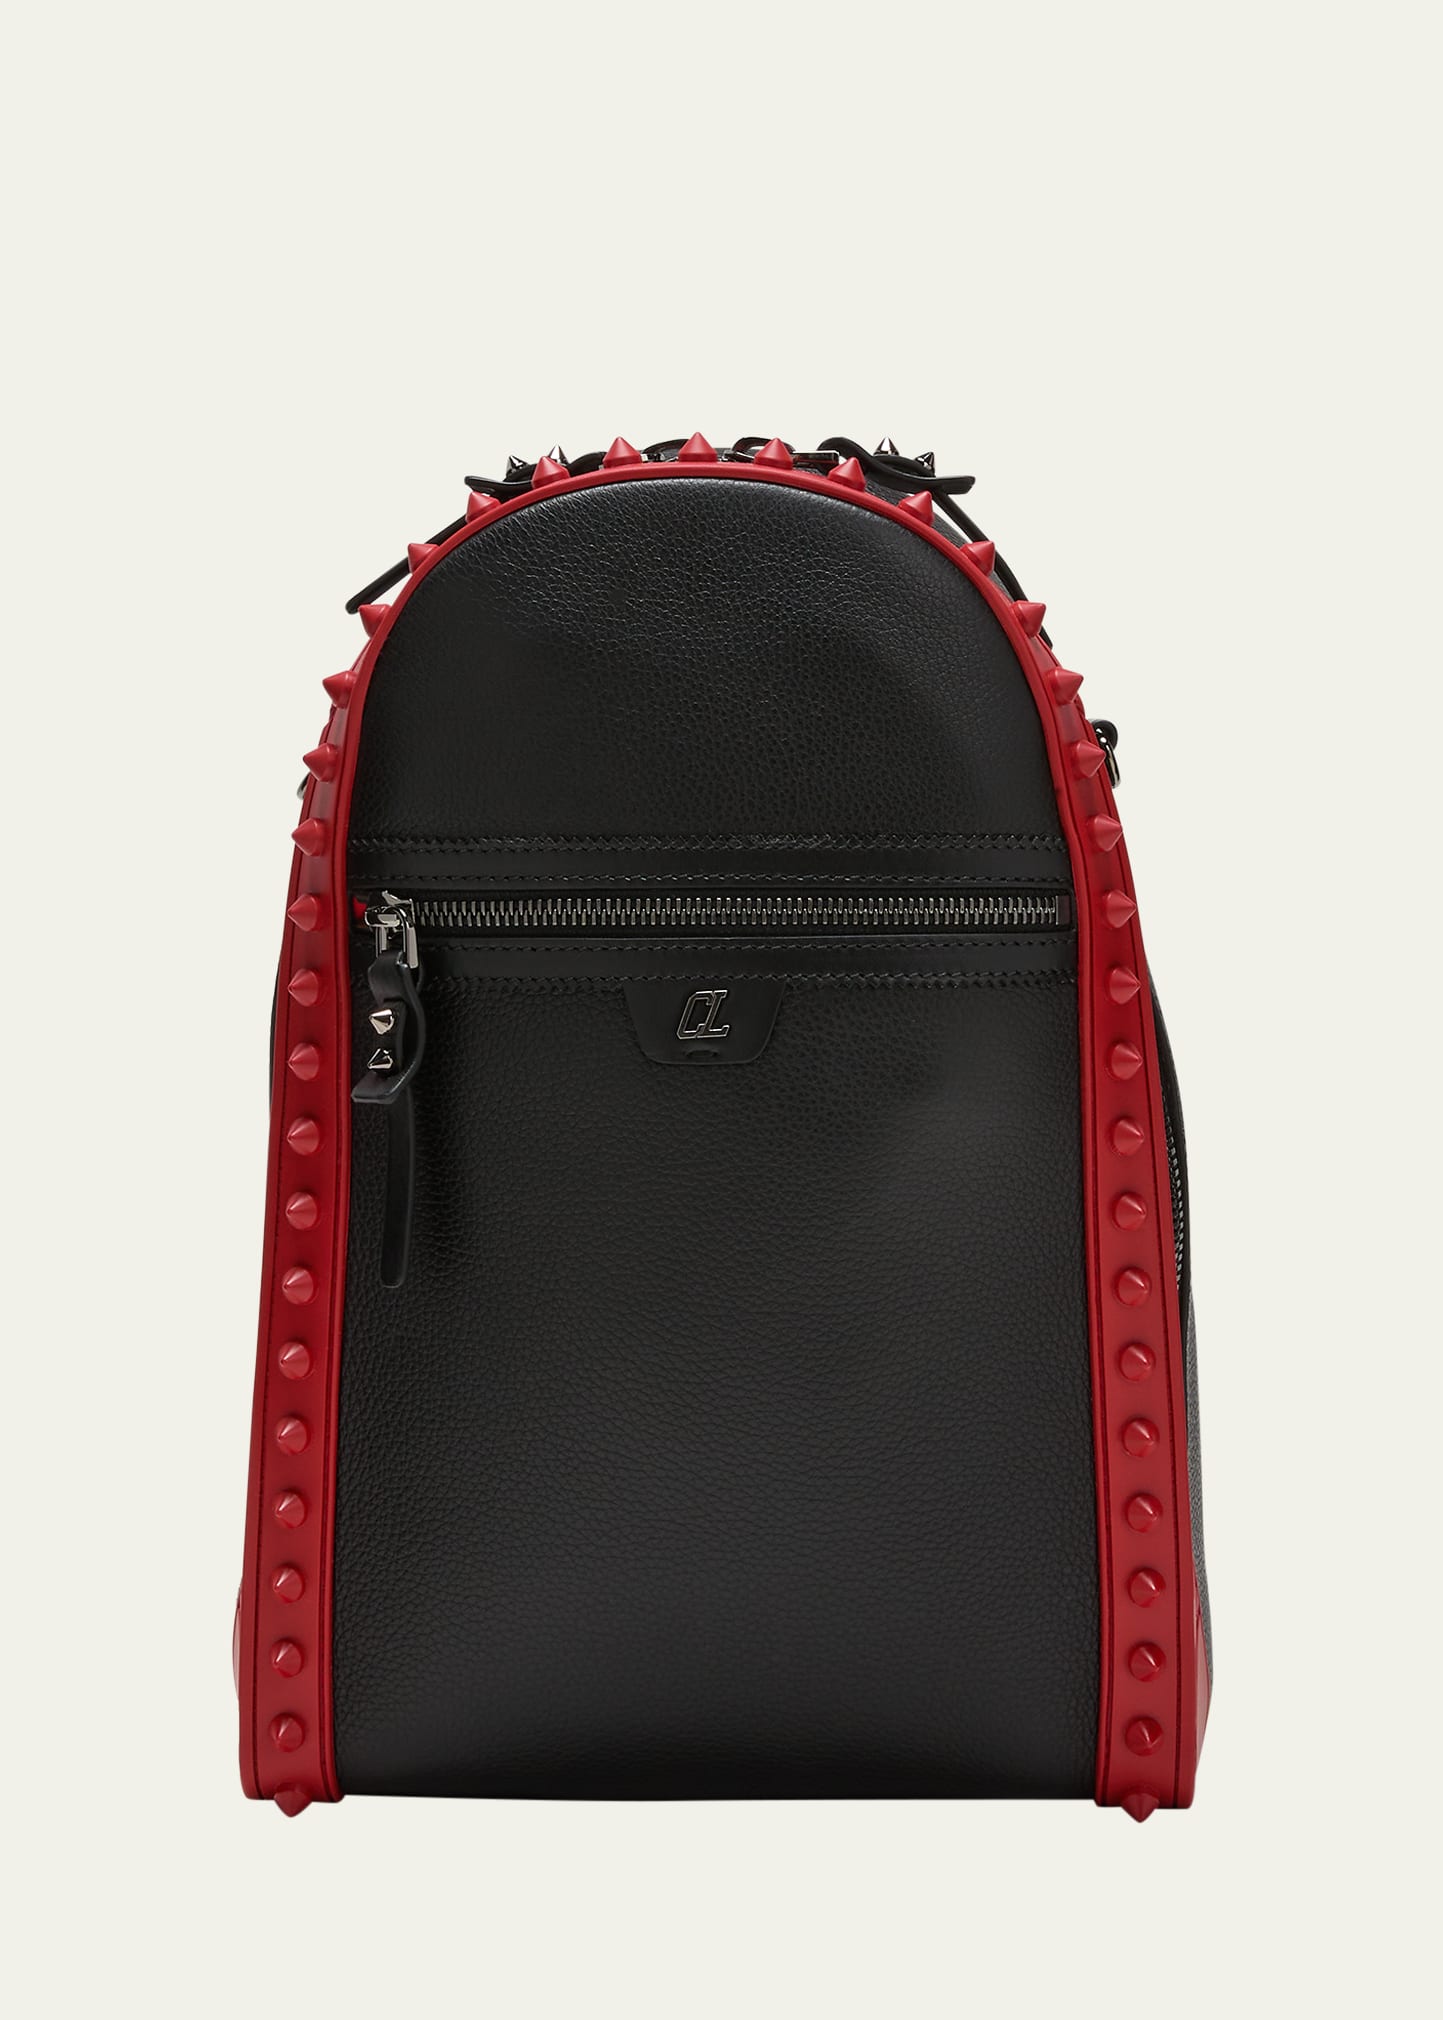 CHRISTIAN LOUBOUTIN MEN'S BACKPARIS LEATHER BACKPACK